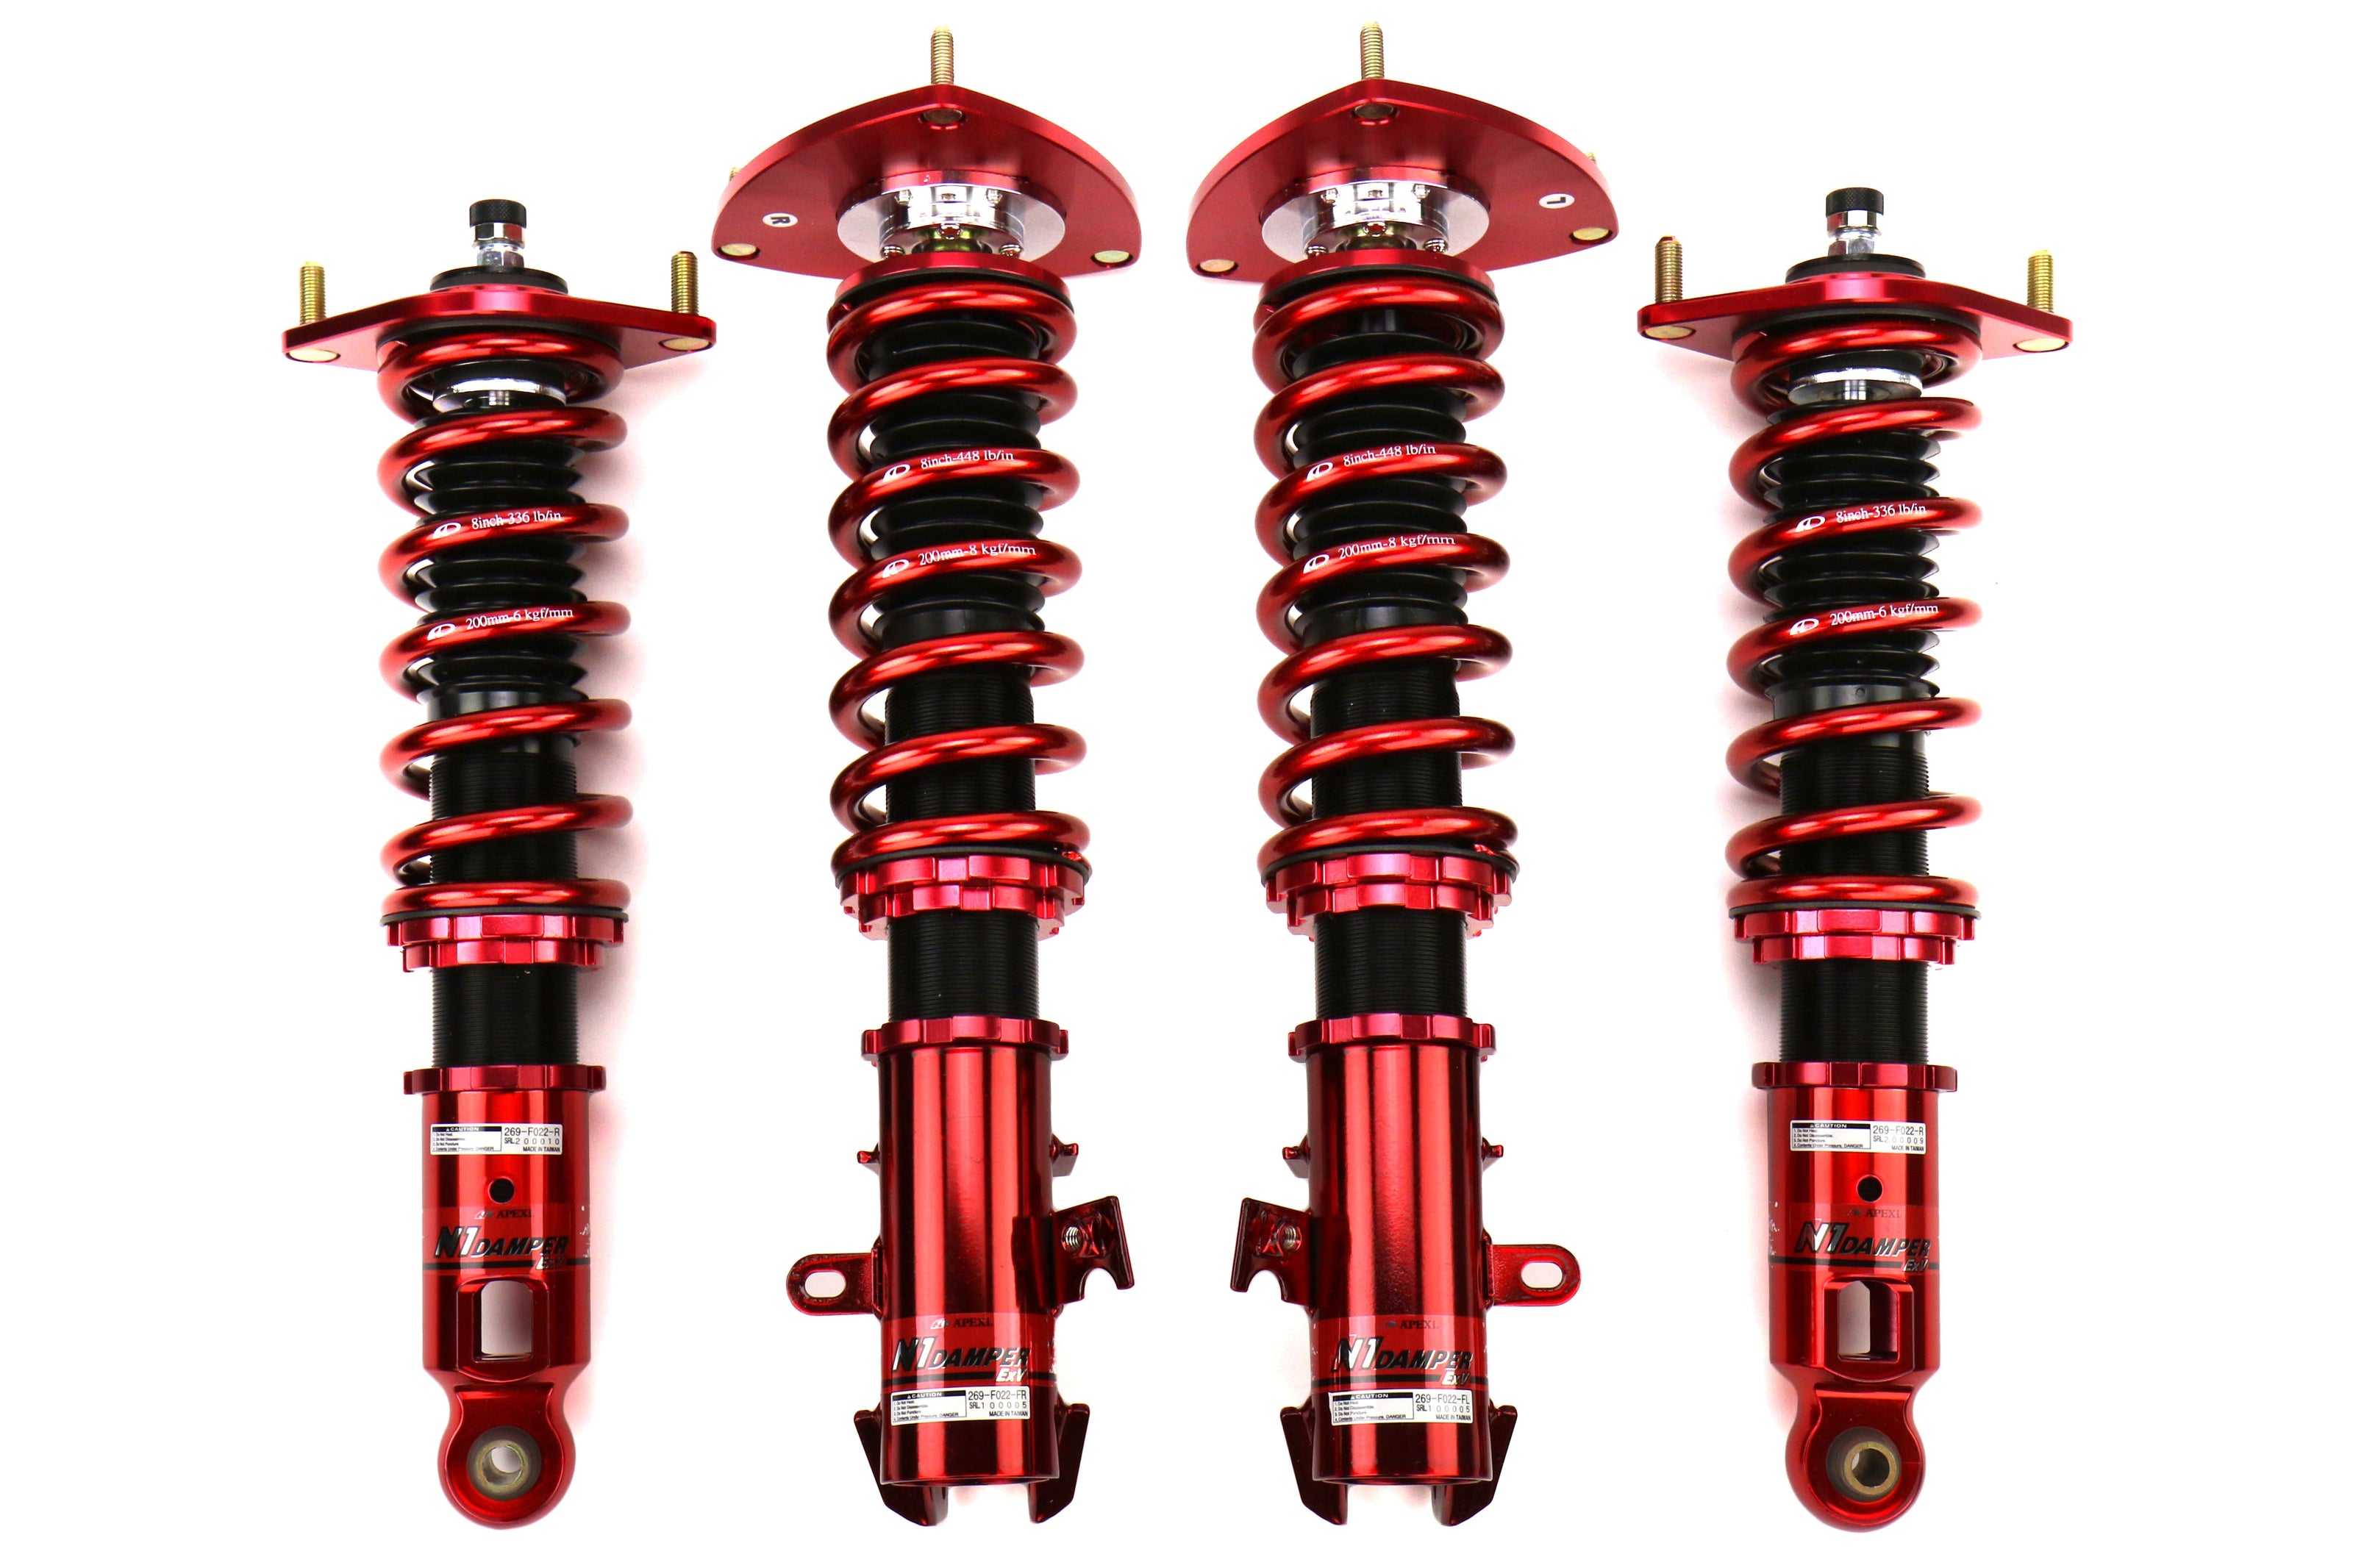 Apexi N1 Coilover System in red with white background